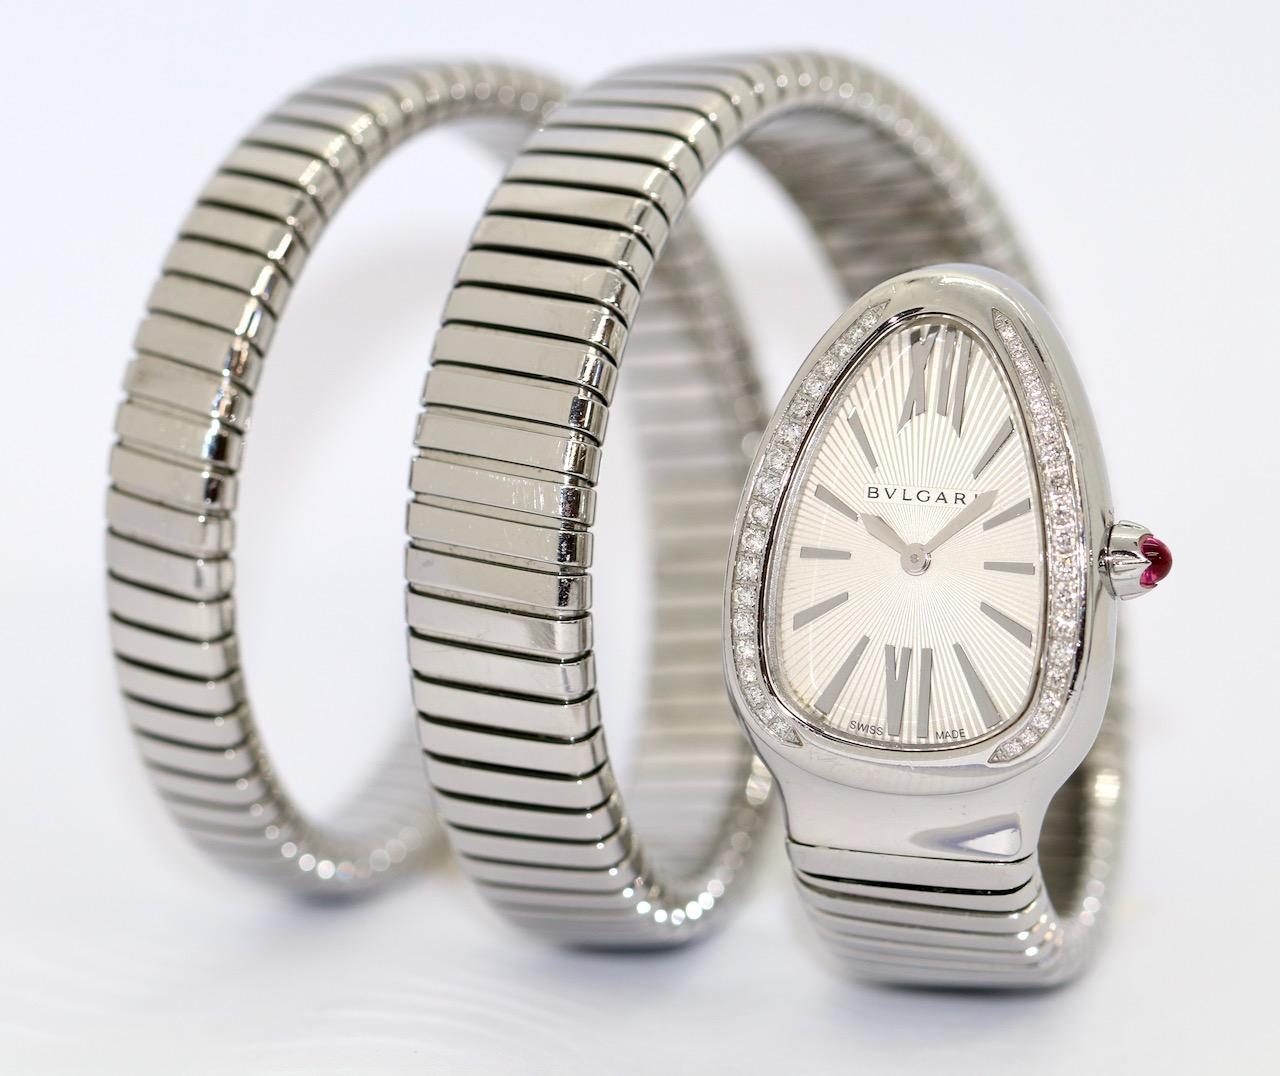 Bulgari Serpenti Tubogas Large Ladies Snake-Watch, with Diamonds, SP35S. Double Loop Model. Case Size 35mm x 23mm.

Including certificate of authenticity.

Experience the luxurious charm and iconic design of Bulgari with this exquisite Serpenti